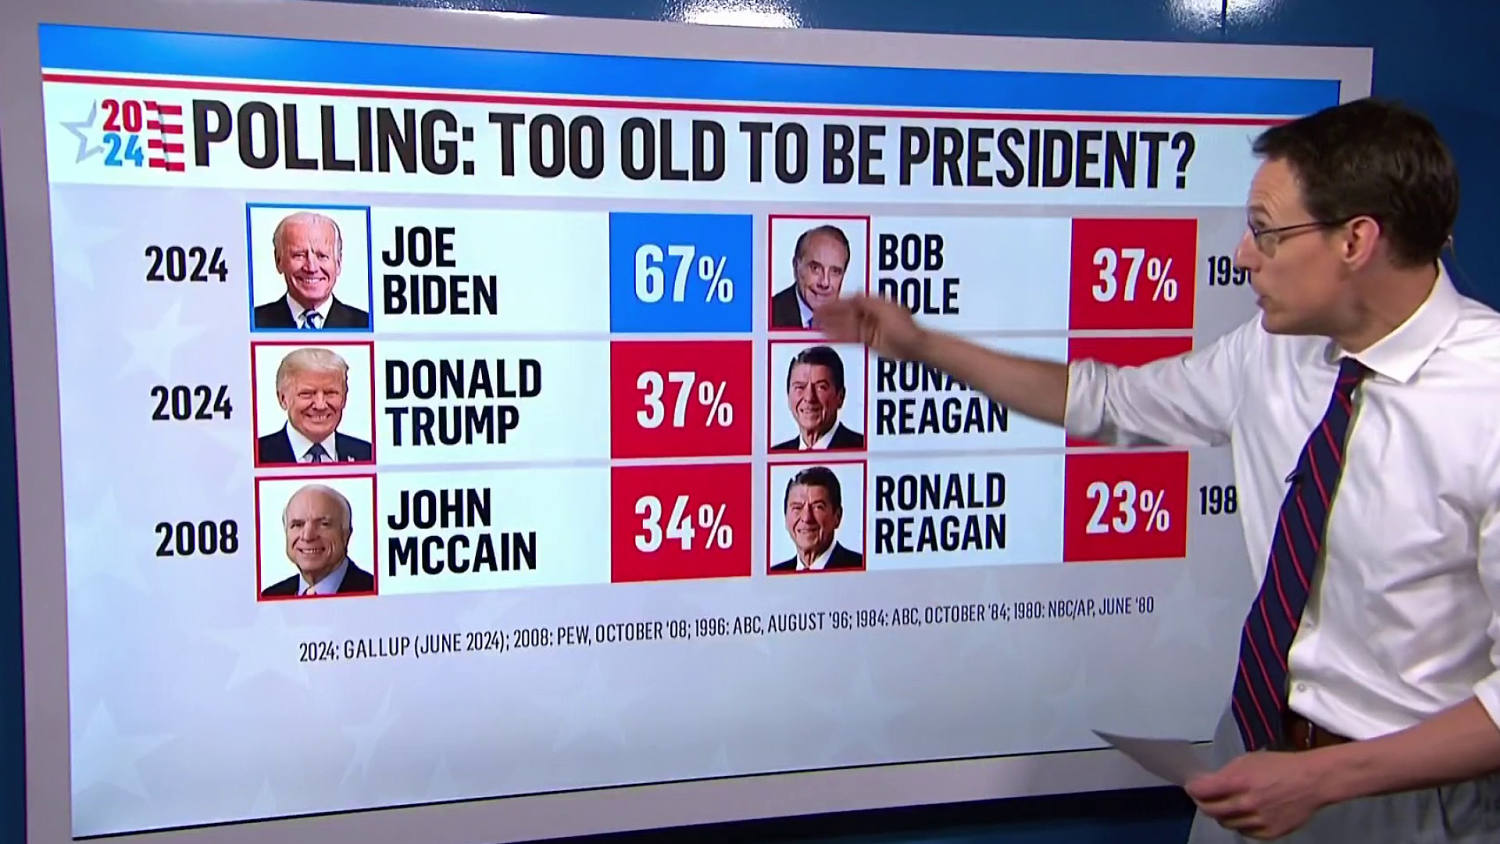 Kornacki: New poll shows Biden’s debate performance reinforced concerns about his age